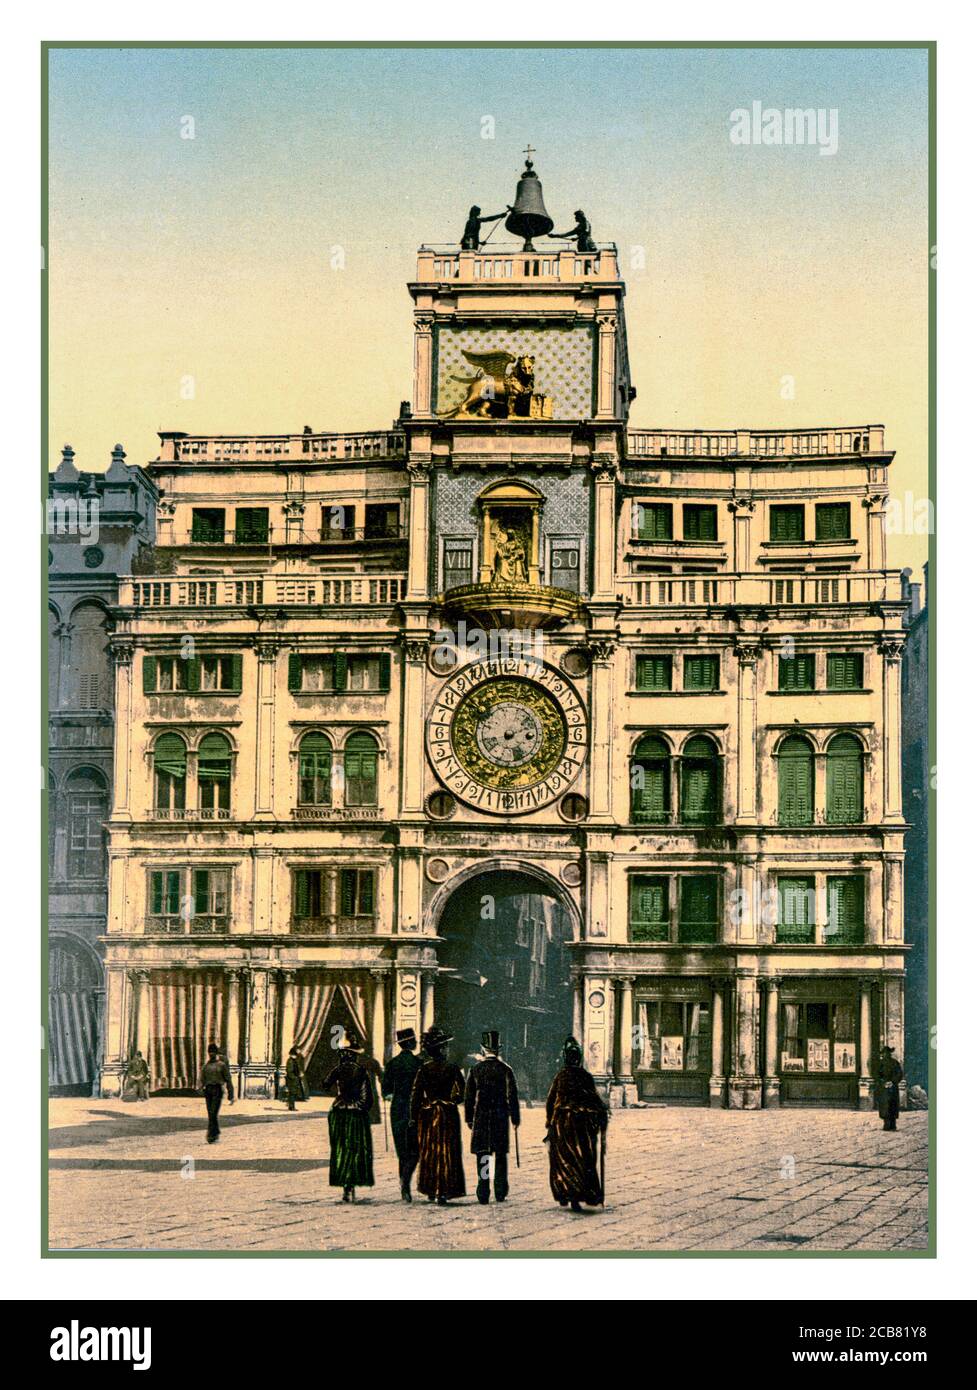 HOROLOGE Archive Vintage Venice The Horologe, Venice, Italy 1900 Chromolithograph Photochrom Historic Old Venice Clock Tower St Mark's Square Venice Italy Stock Photo